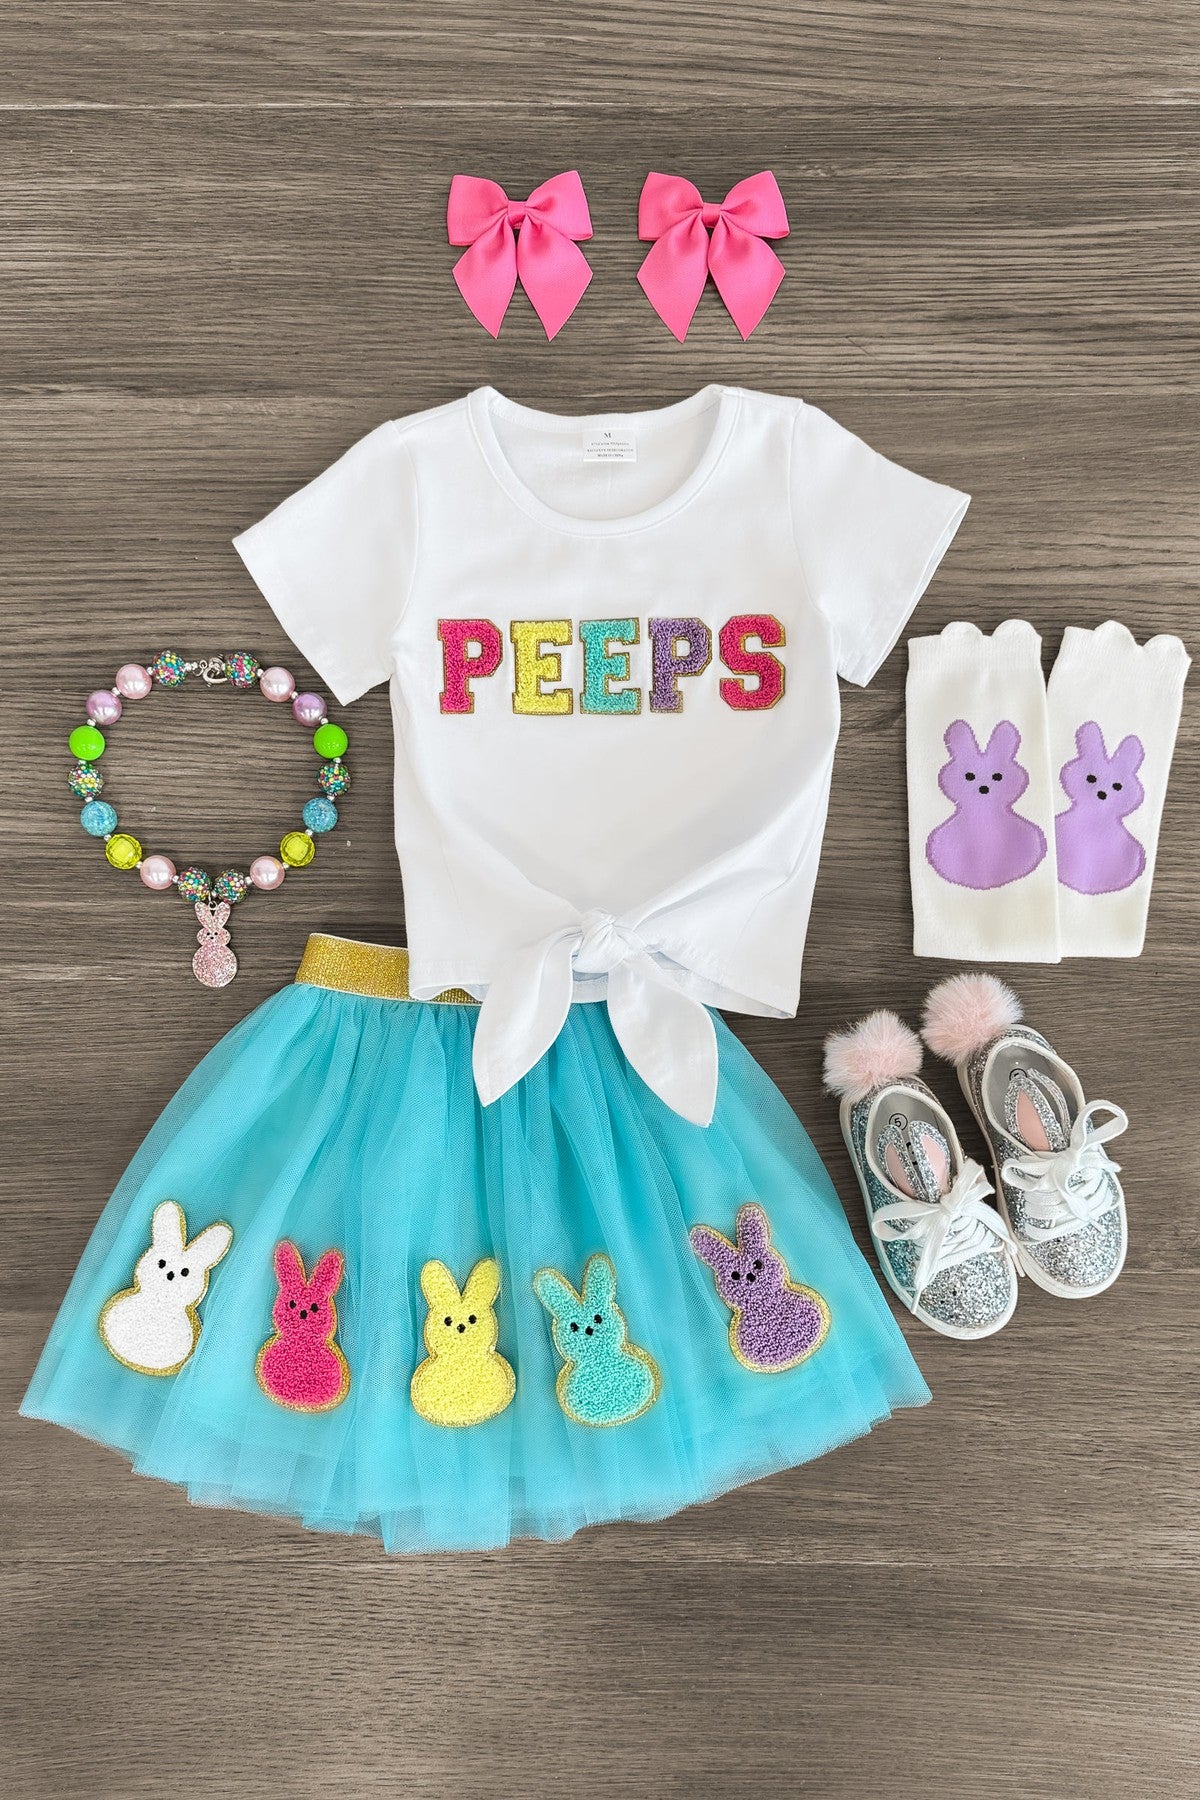 "Peeps" Chenille Patch Tutu Skirt Set - Sparkle in Pink